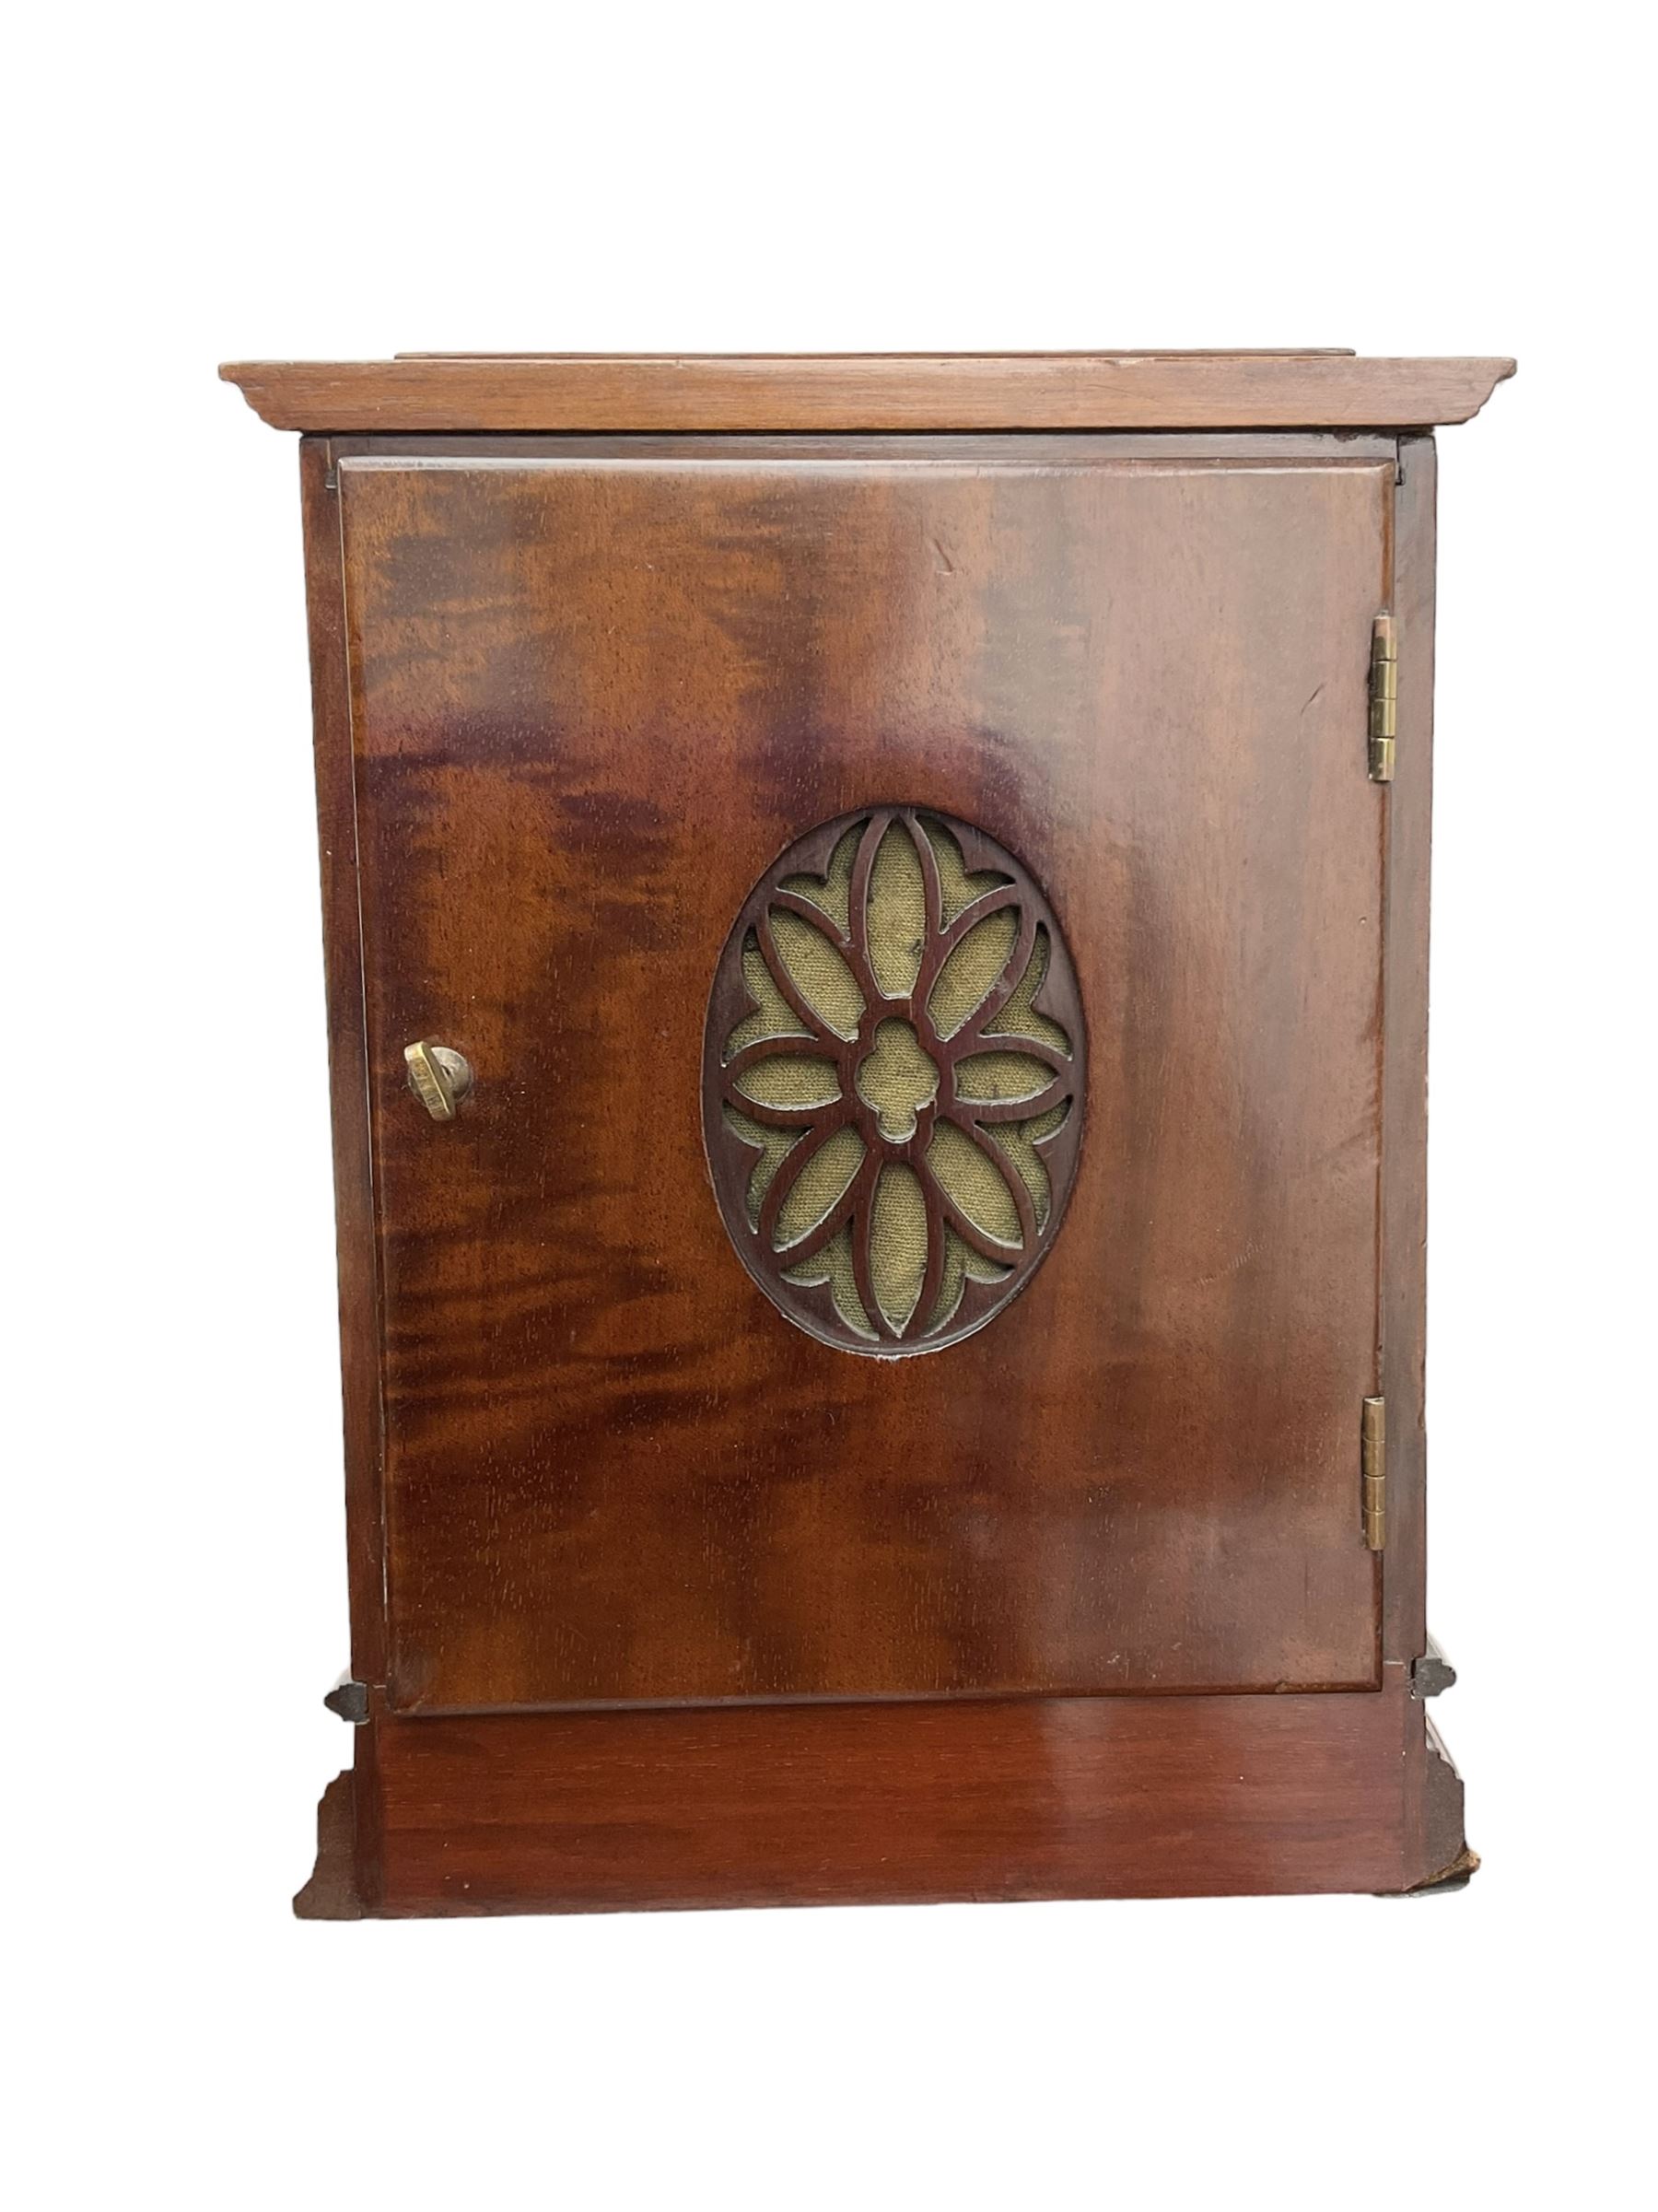 Continental early 20th century mahogany cased 8-day mantle clock - Image 3 of 5